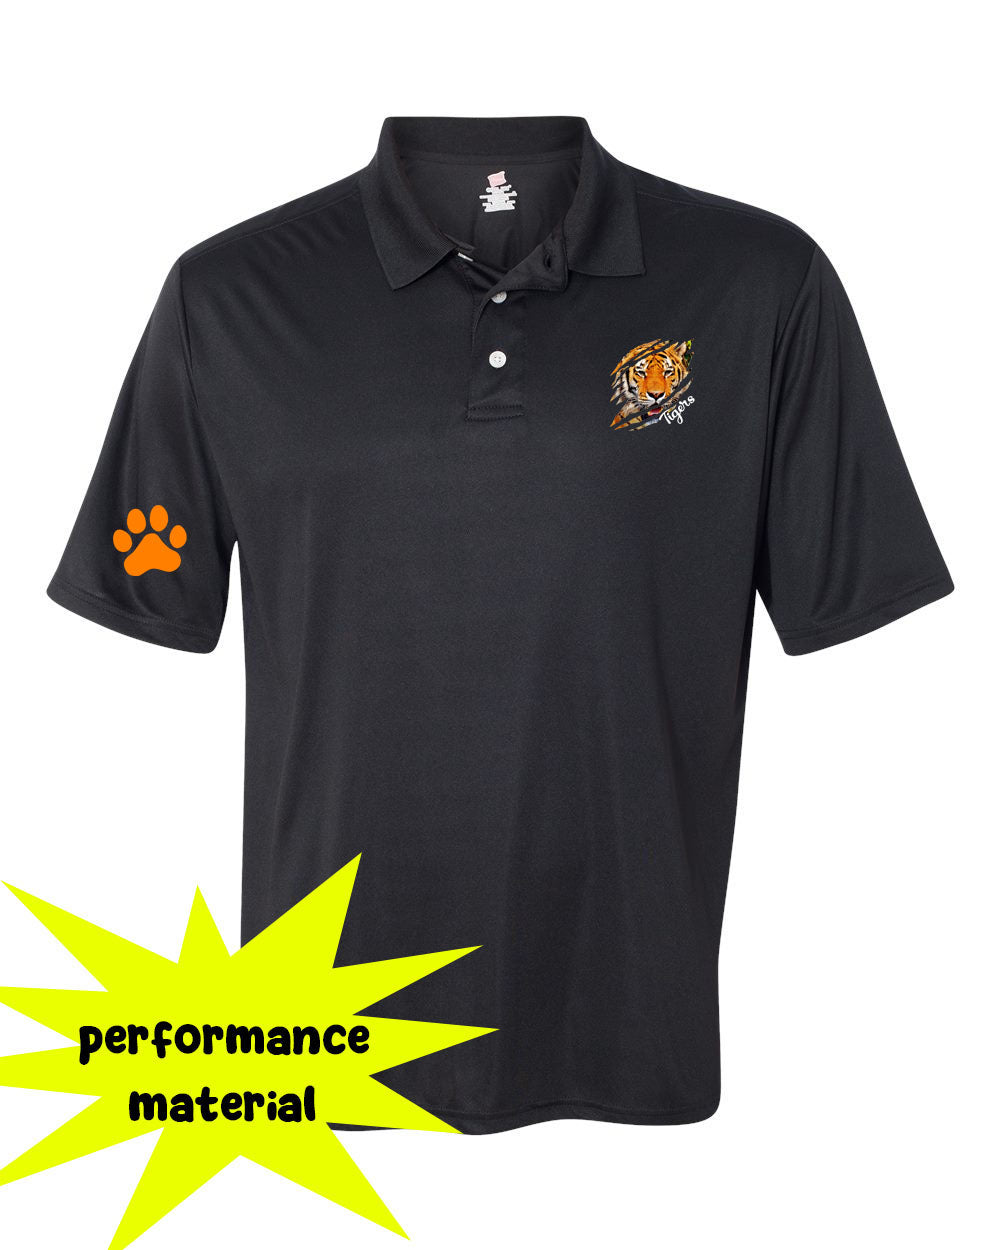 Lafayette Tigers Performance Material Polo T-Shirt Design 10